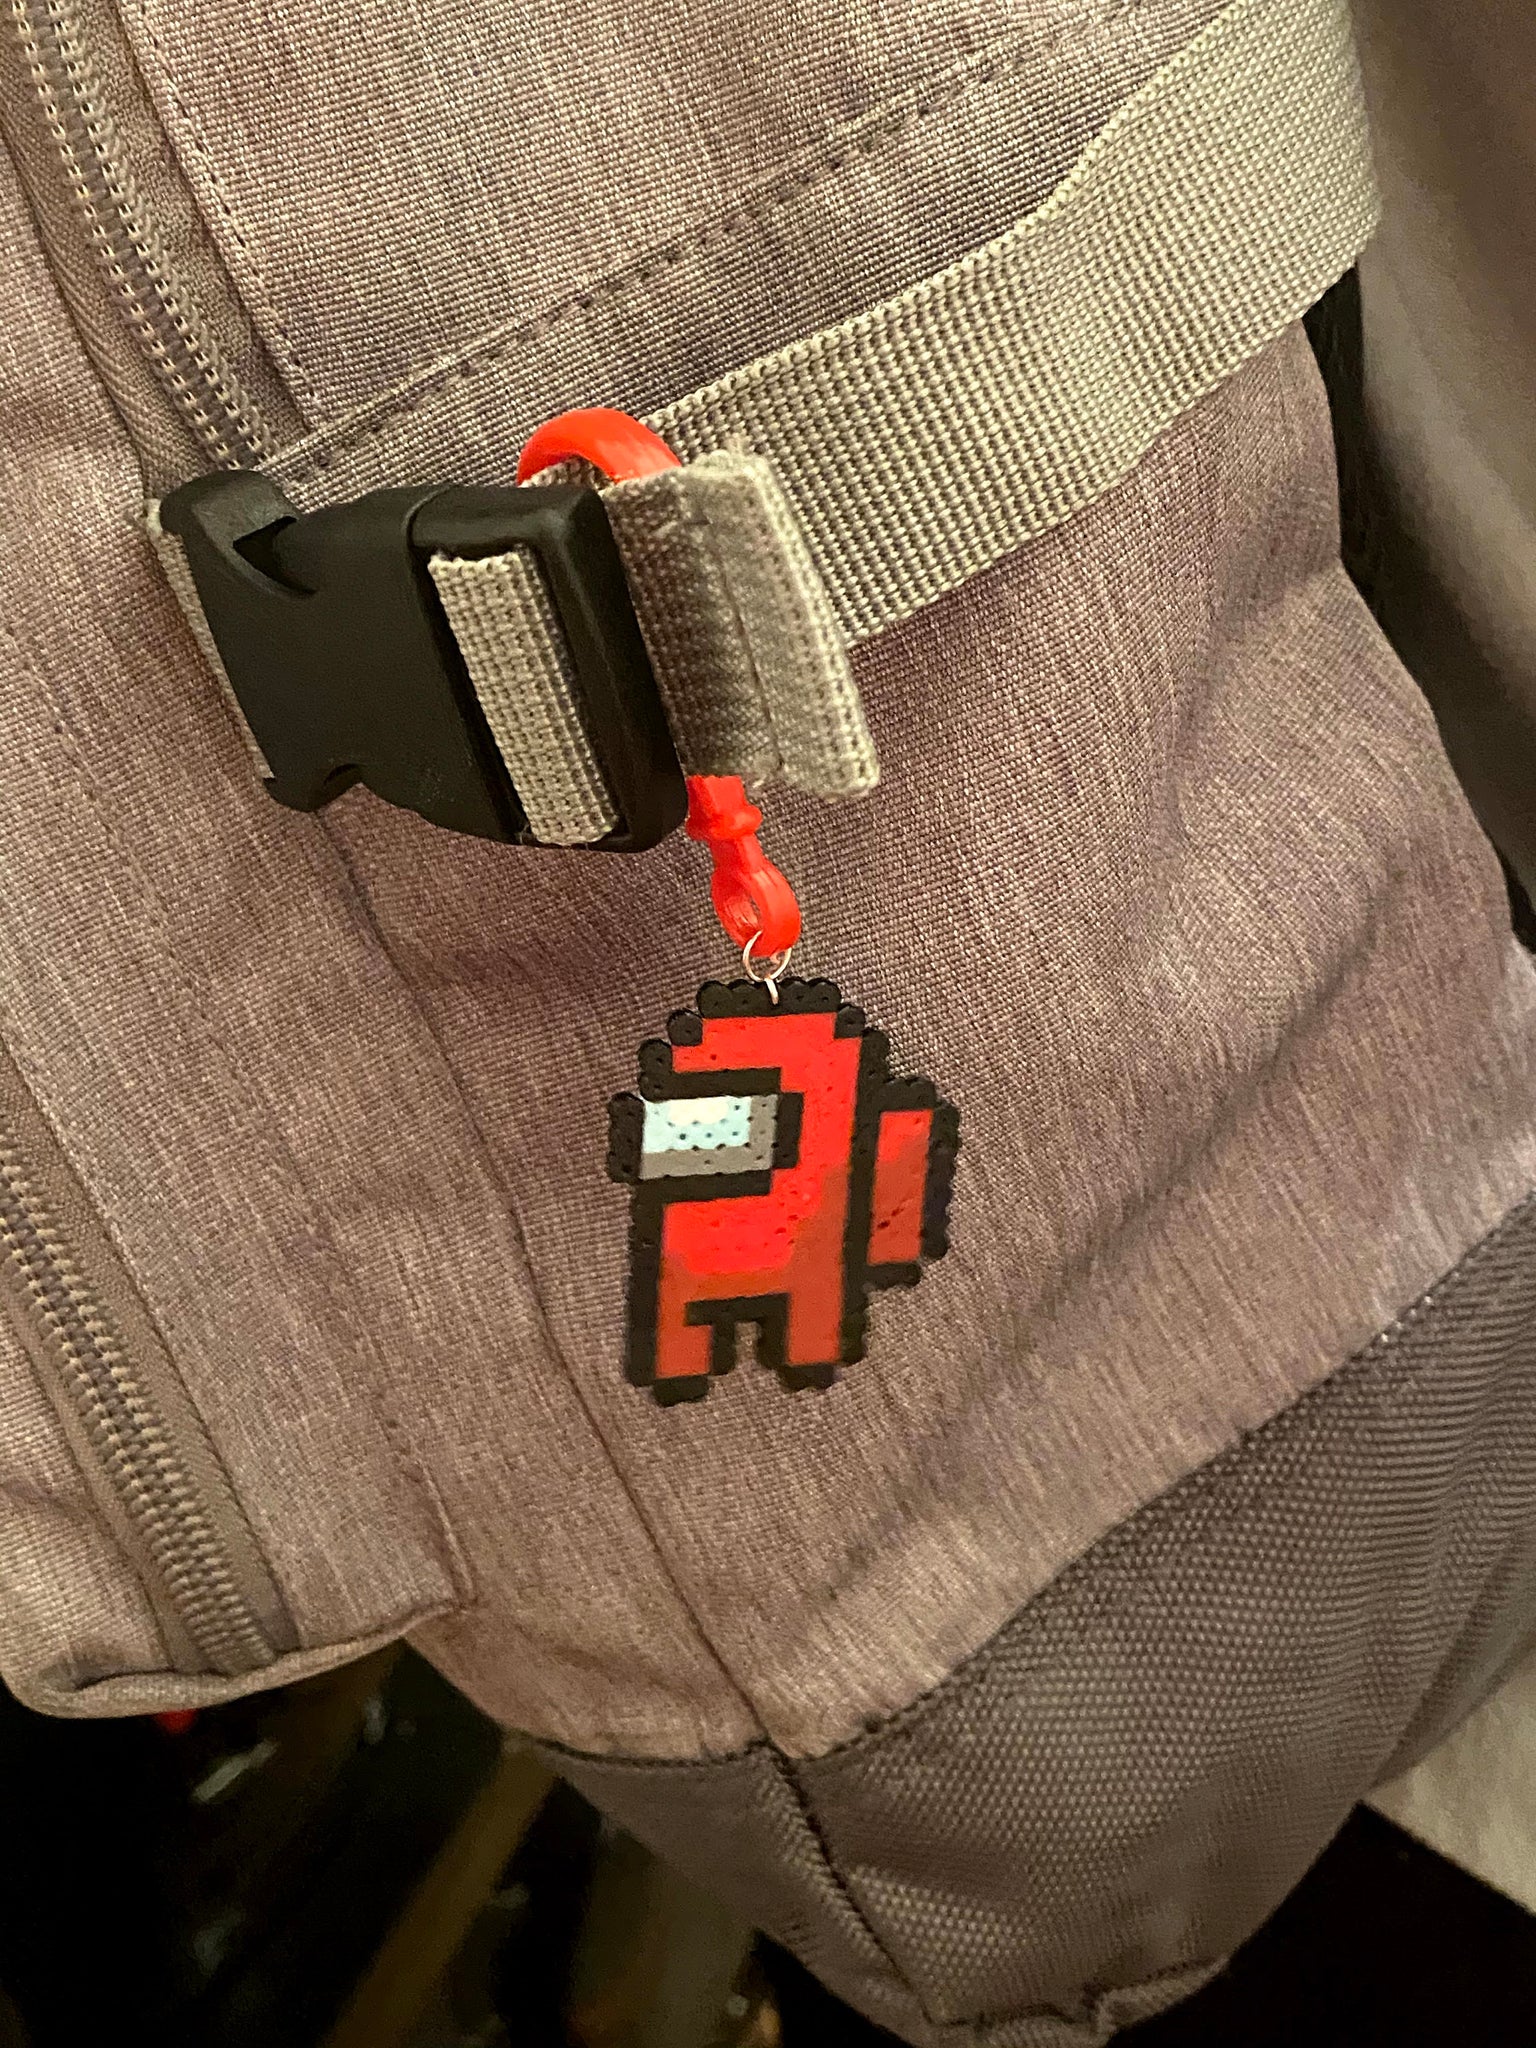 Gaming Backpack Clips, Bag Clips, Lobster Clasp, Perler Mini Bead